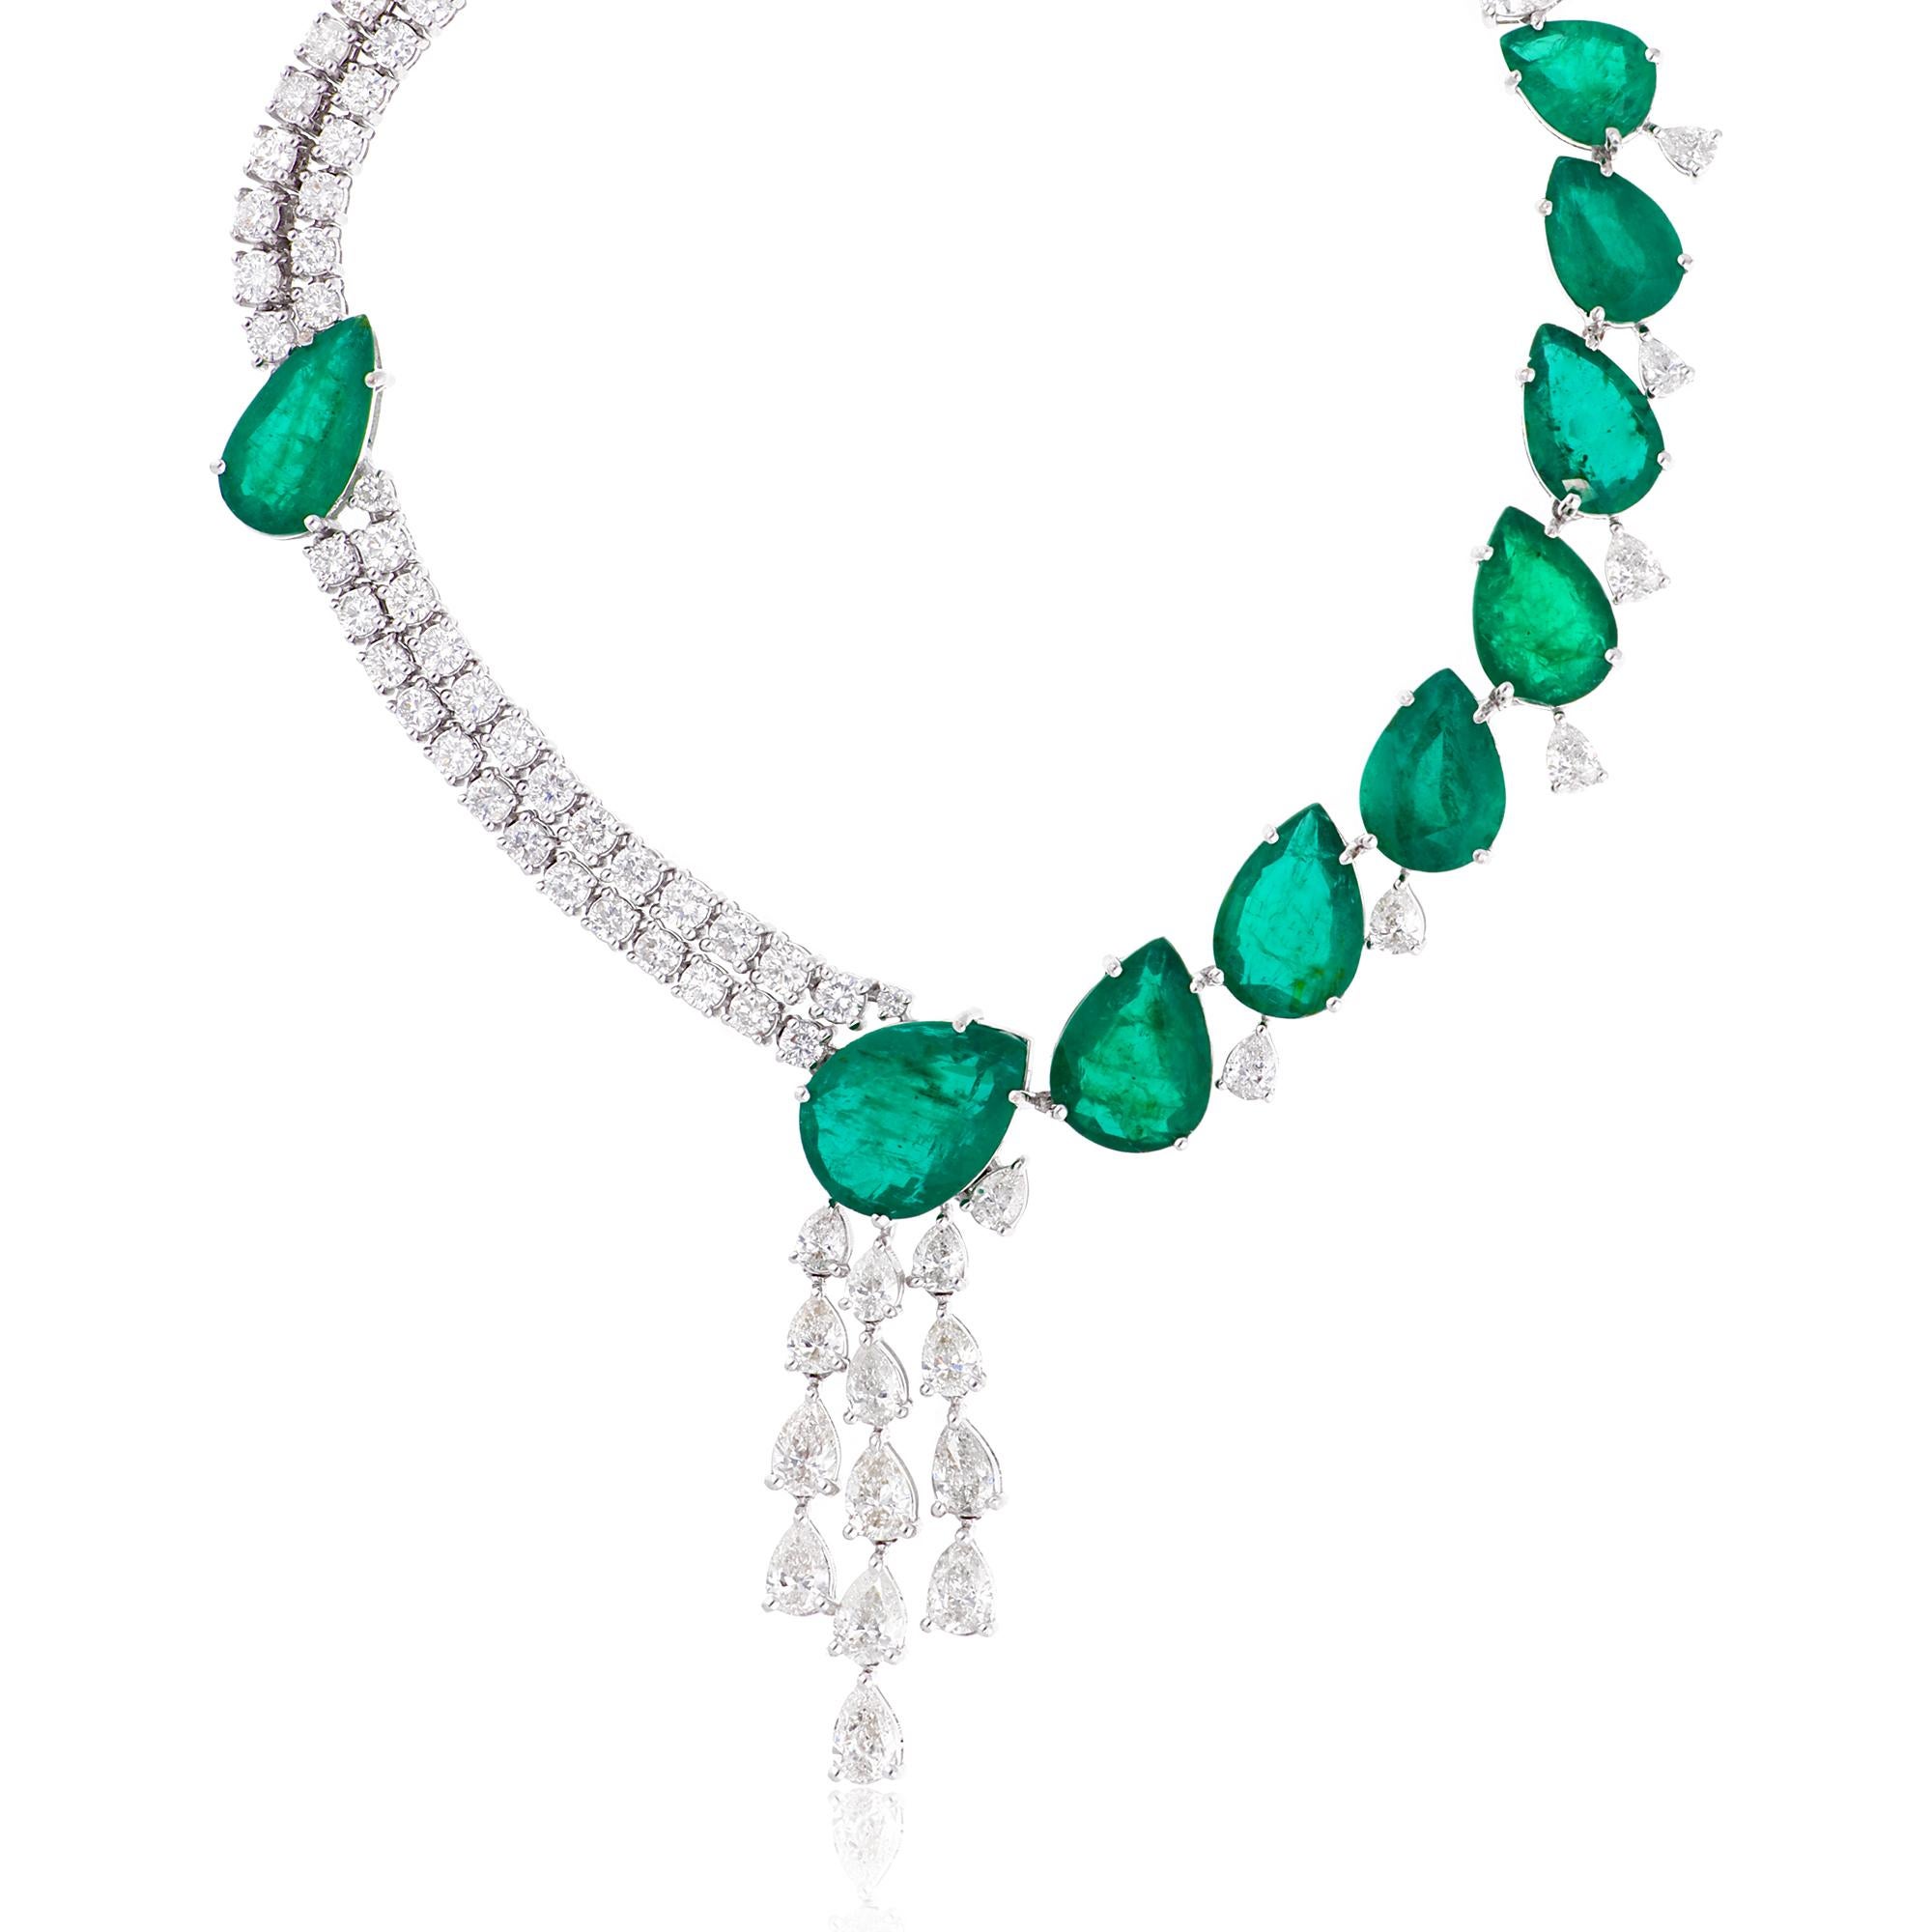 Elevate your style with the exquisite beauty of this Pear Shape Emerald Gemstone Necklace. Meticulously handcrafted with meticulous attention to detail, this stunning piece features a captivating pear-shaped emerald gemstone accented with shimmering